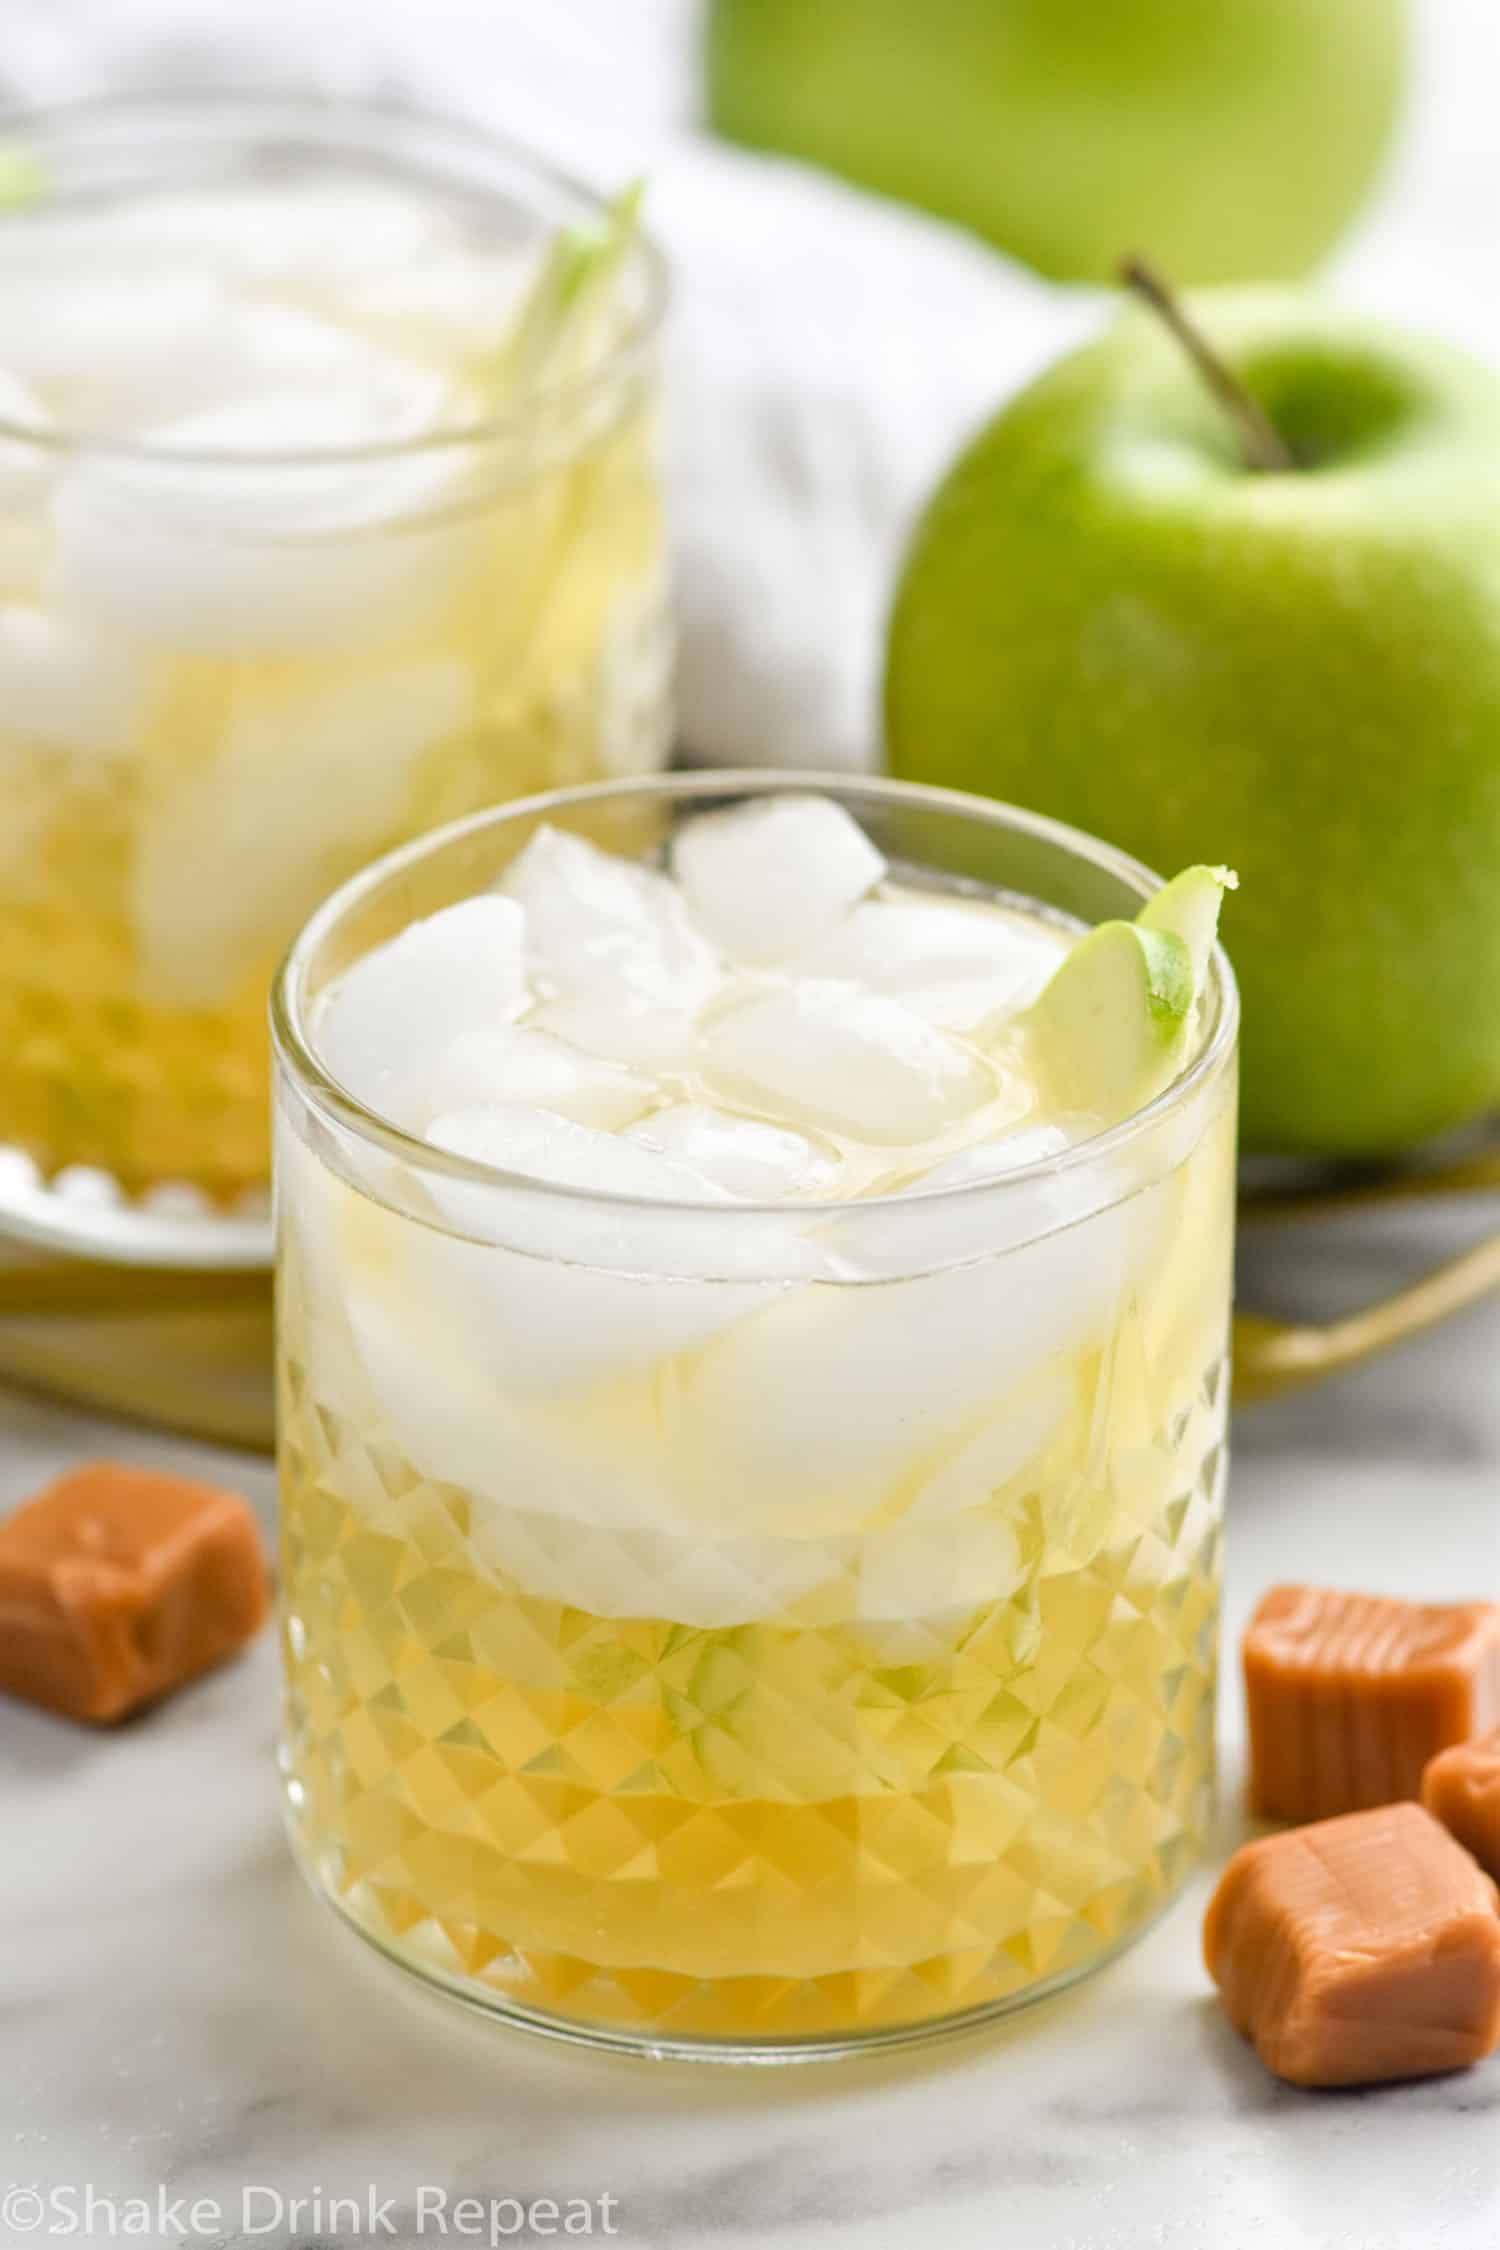 Photo of Caramel Apple Old Fashioned with apples and caramel beside